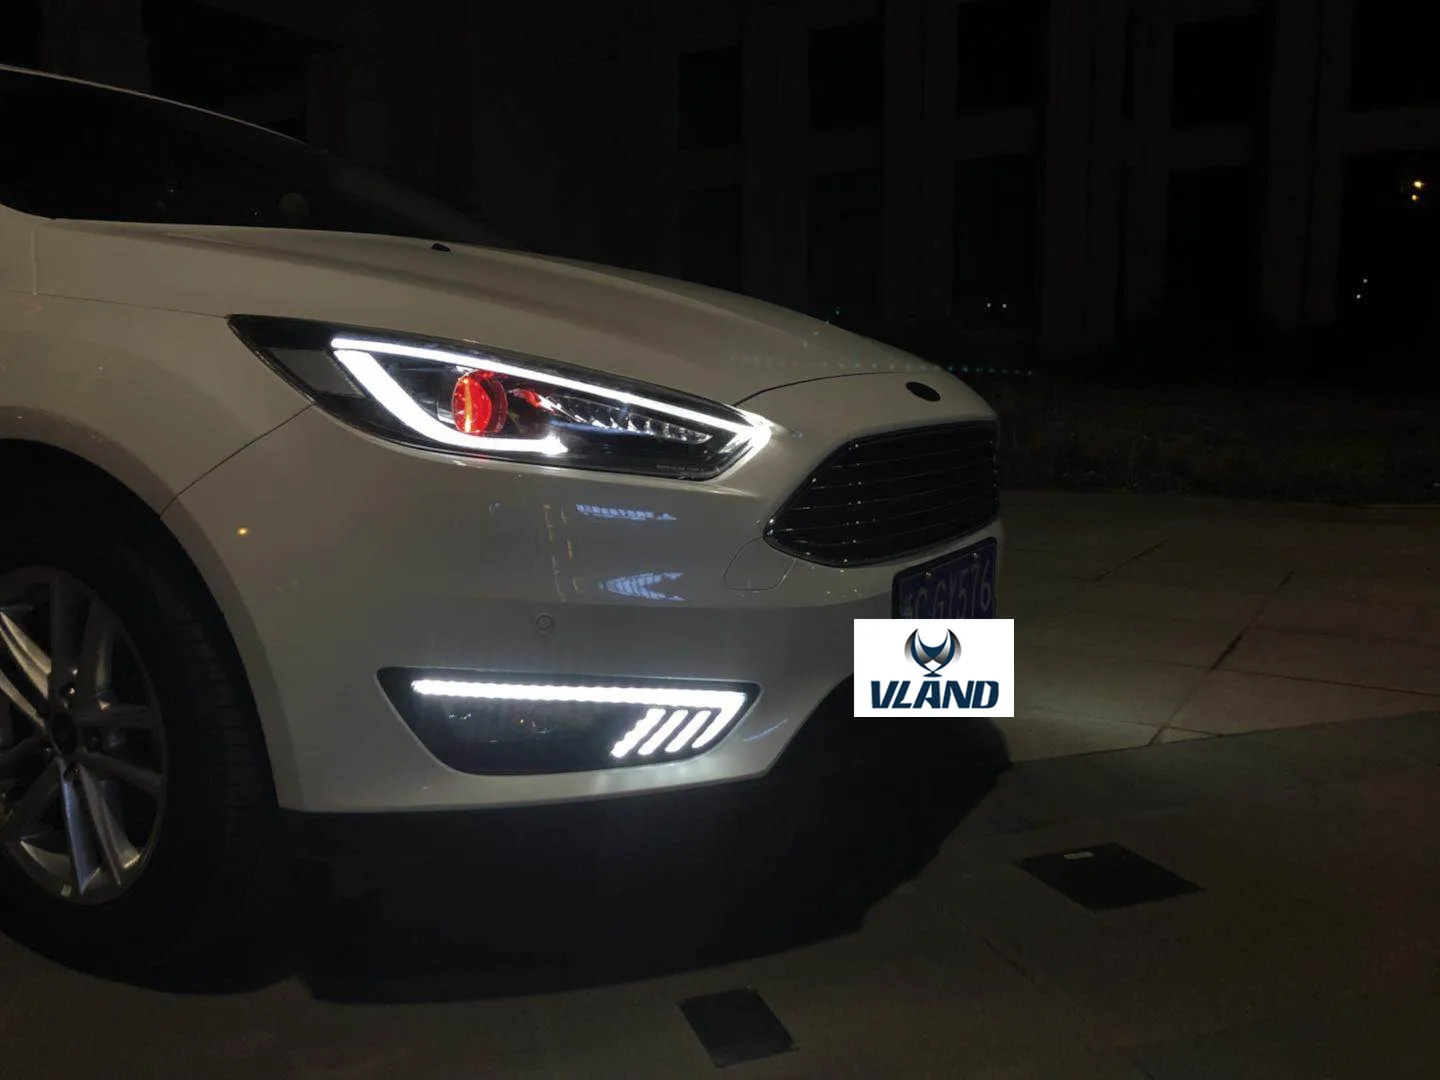 VLAND manufacturer for car headlight for Focus 2015 2016 2017 LED head light with moving signal with demon eye plug and play